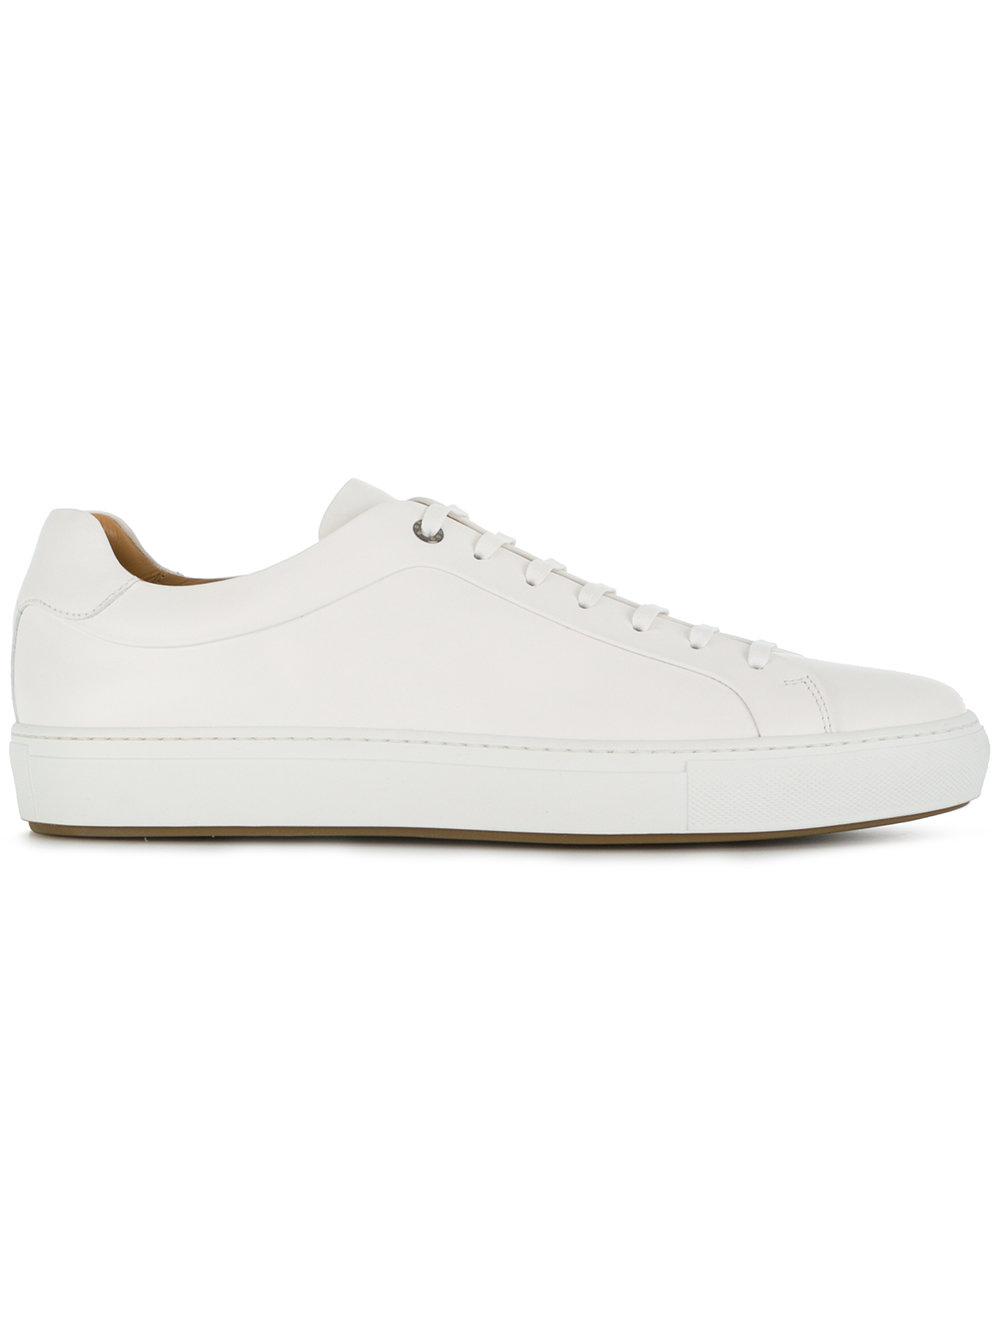 BOSS by Hugo Boss Leather Classic Lace-up Sneakers in White for Men - Lyst